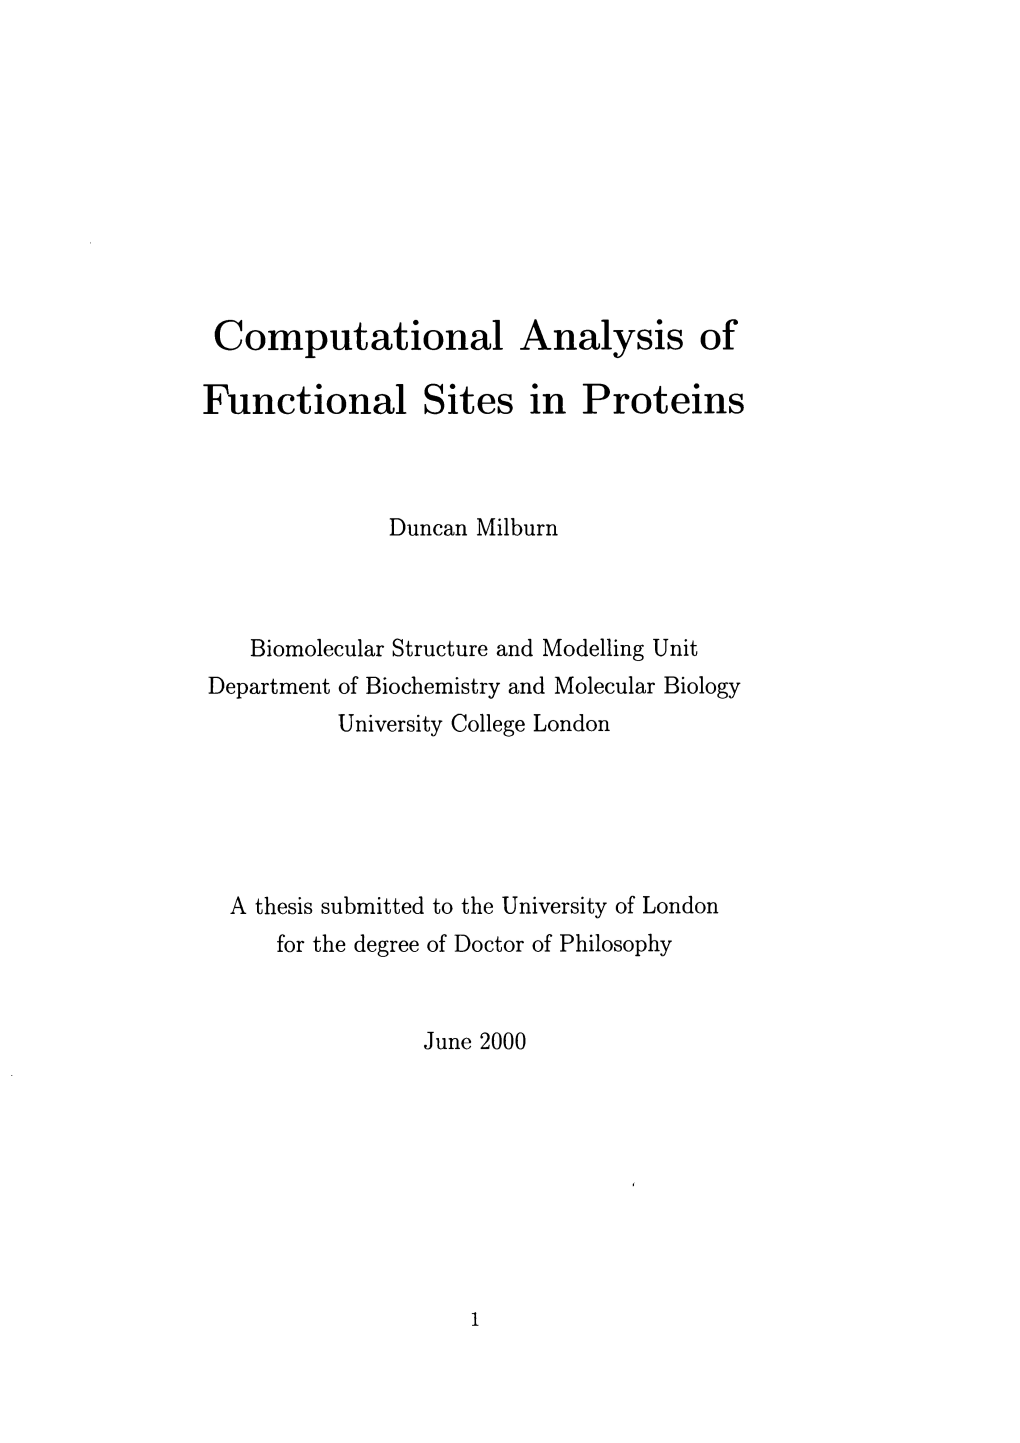 Computational Analysis of Functional Sites in Proteins